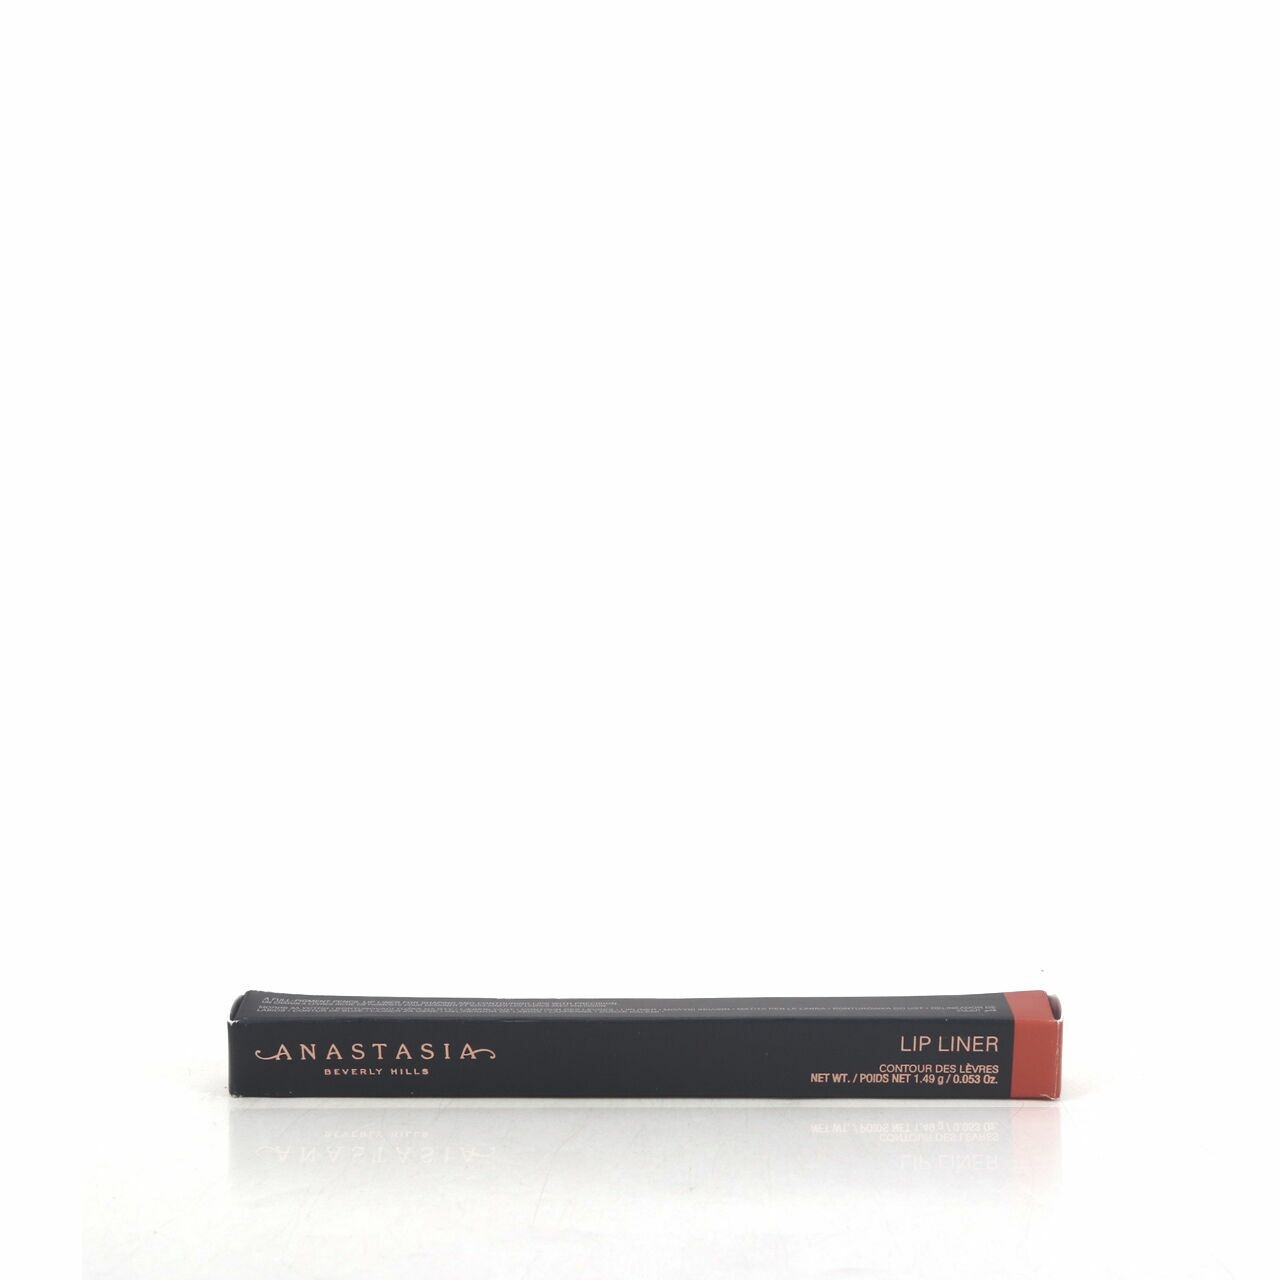 Anastasia Beverly Hills Lip Liner Parch-Ment